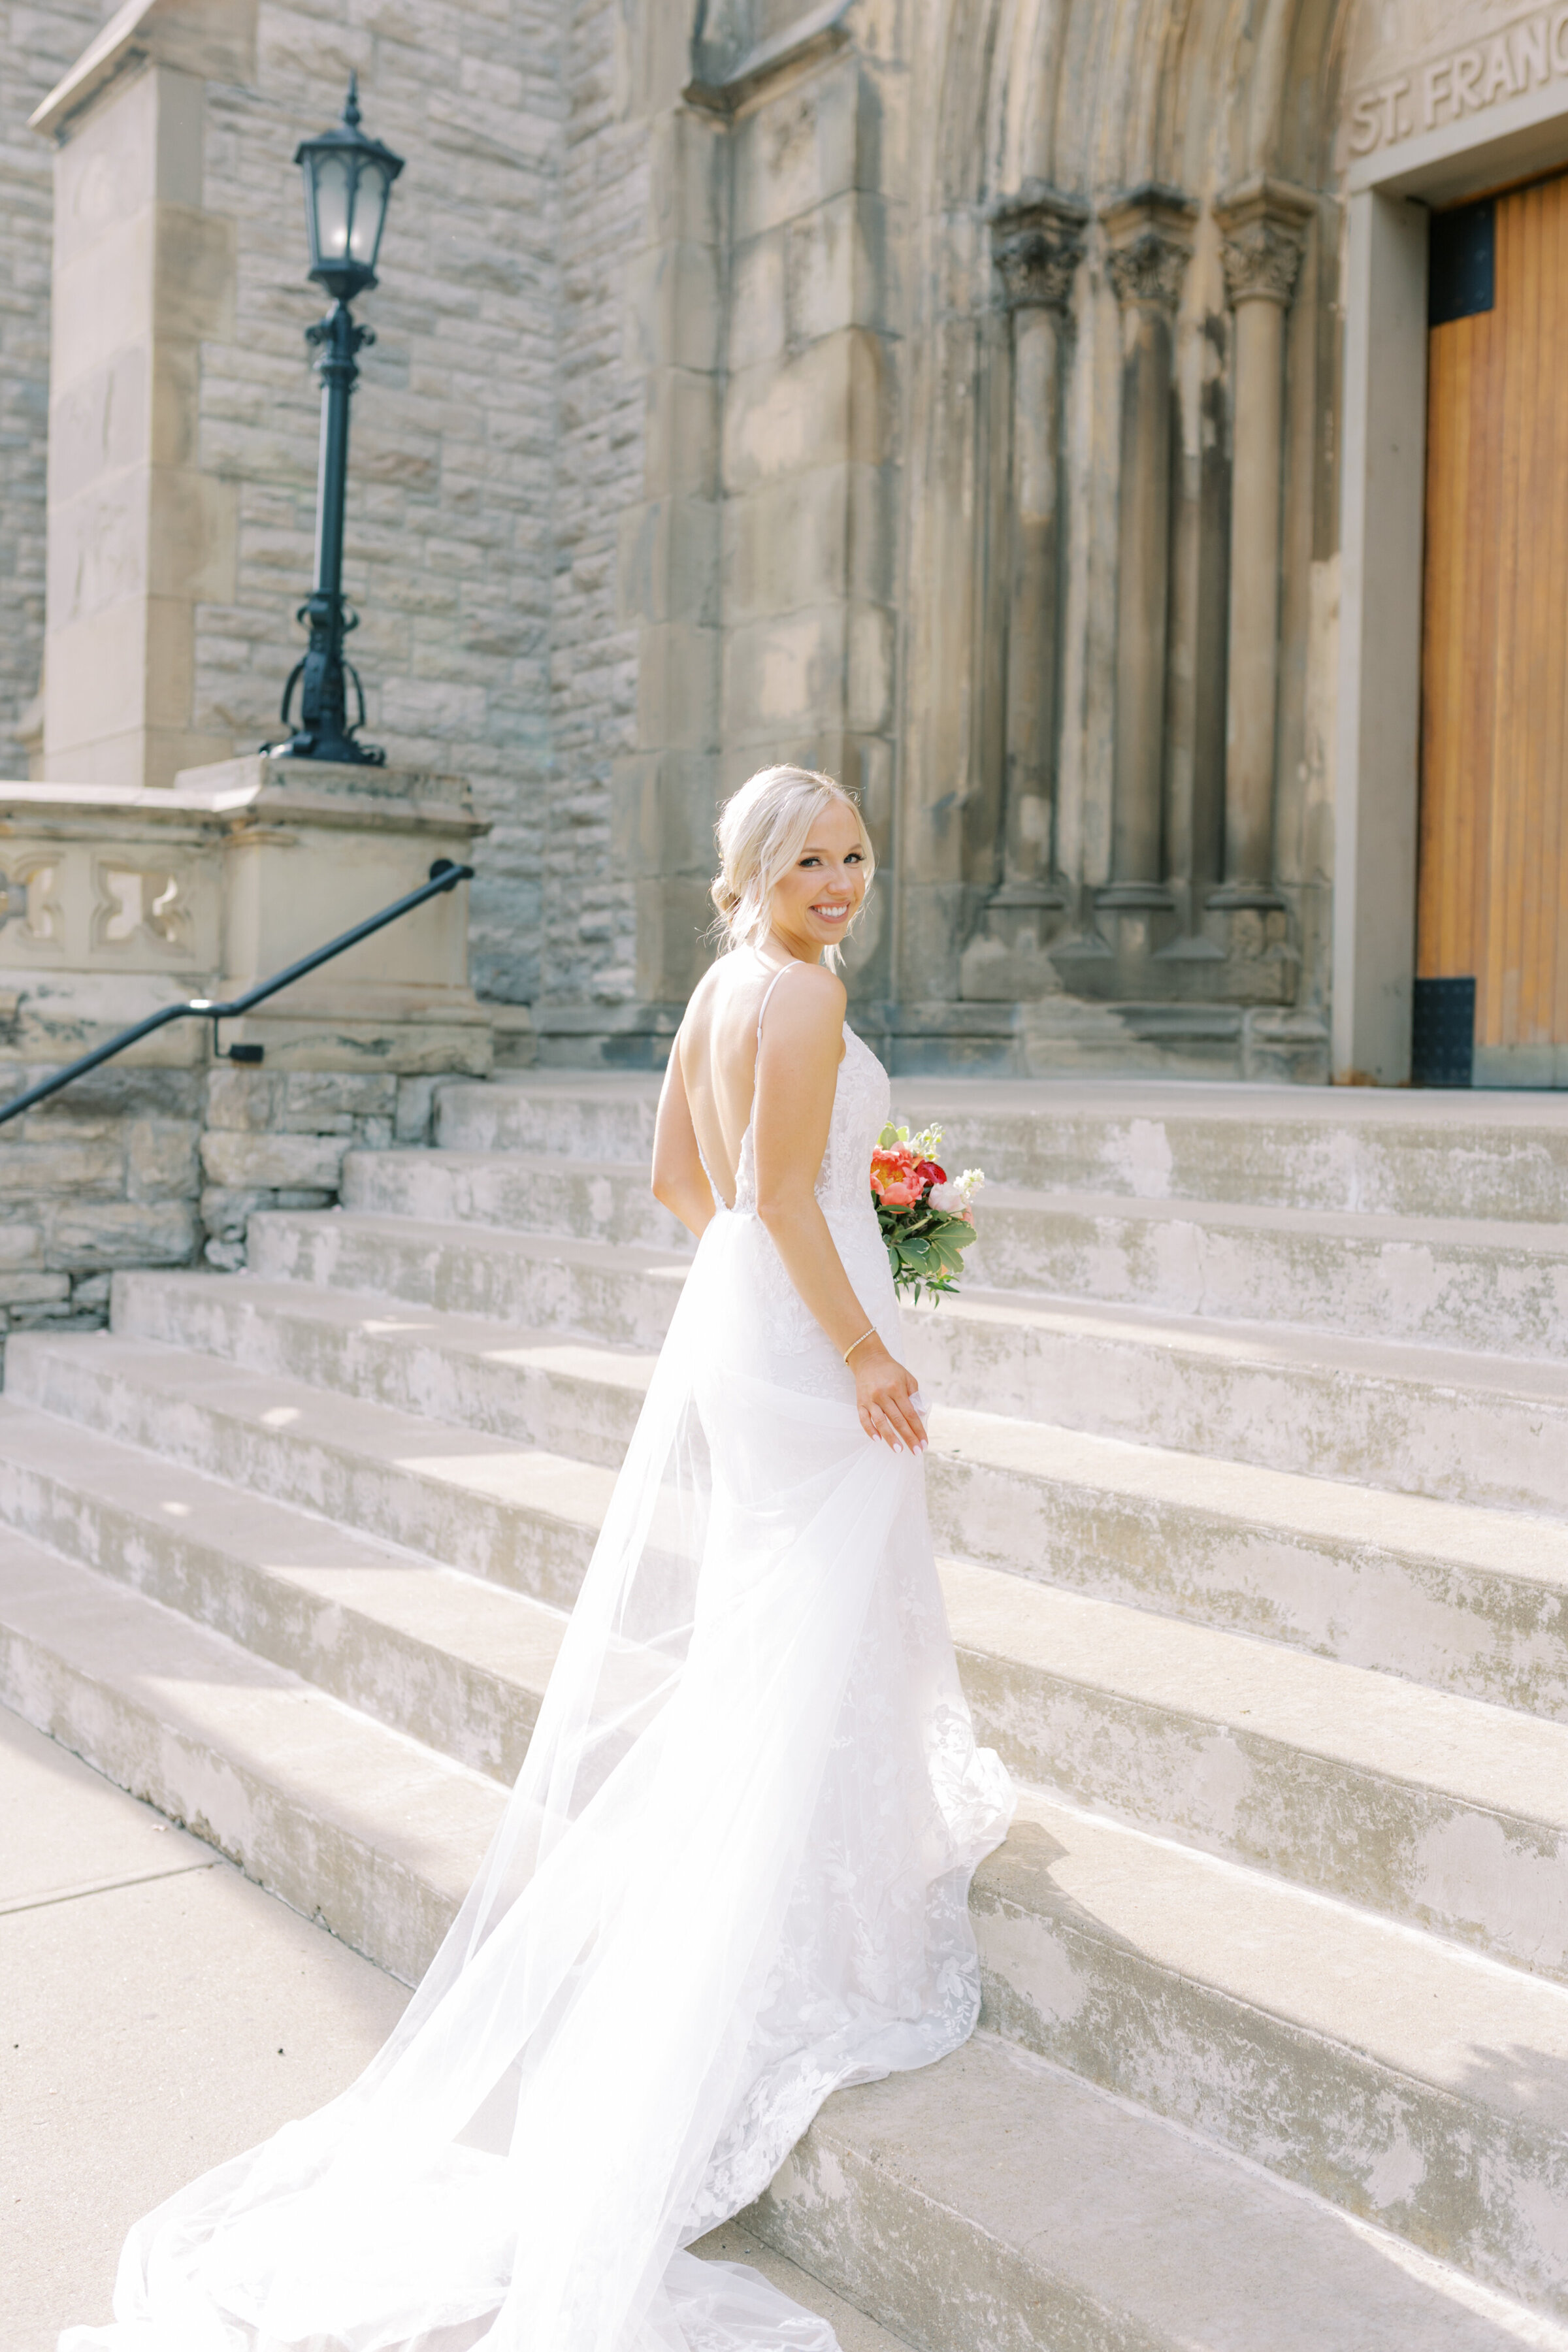 Bride walking up the stairs into the church on her wedding day smiling towards the camera